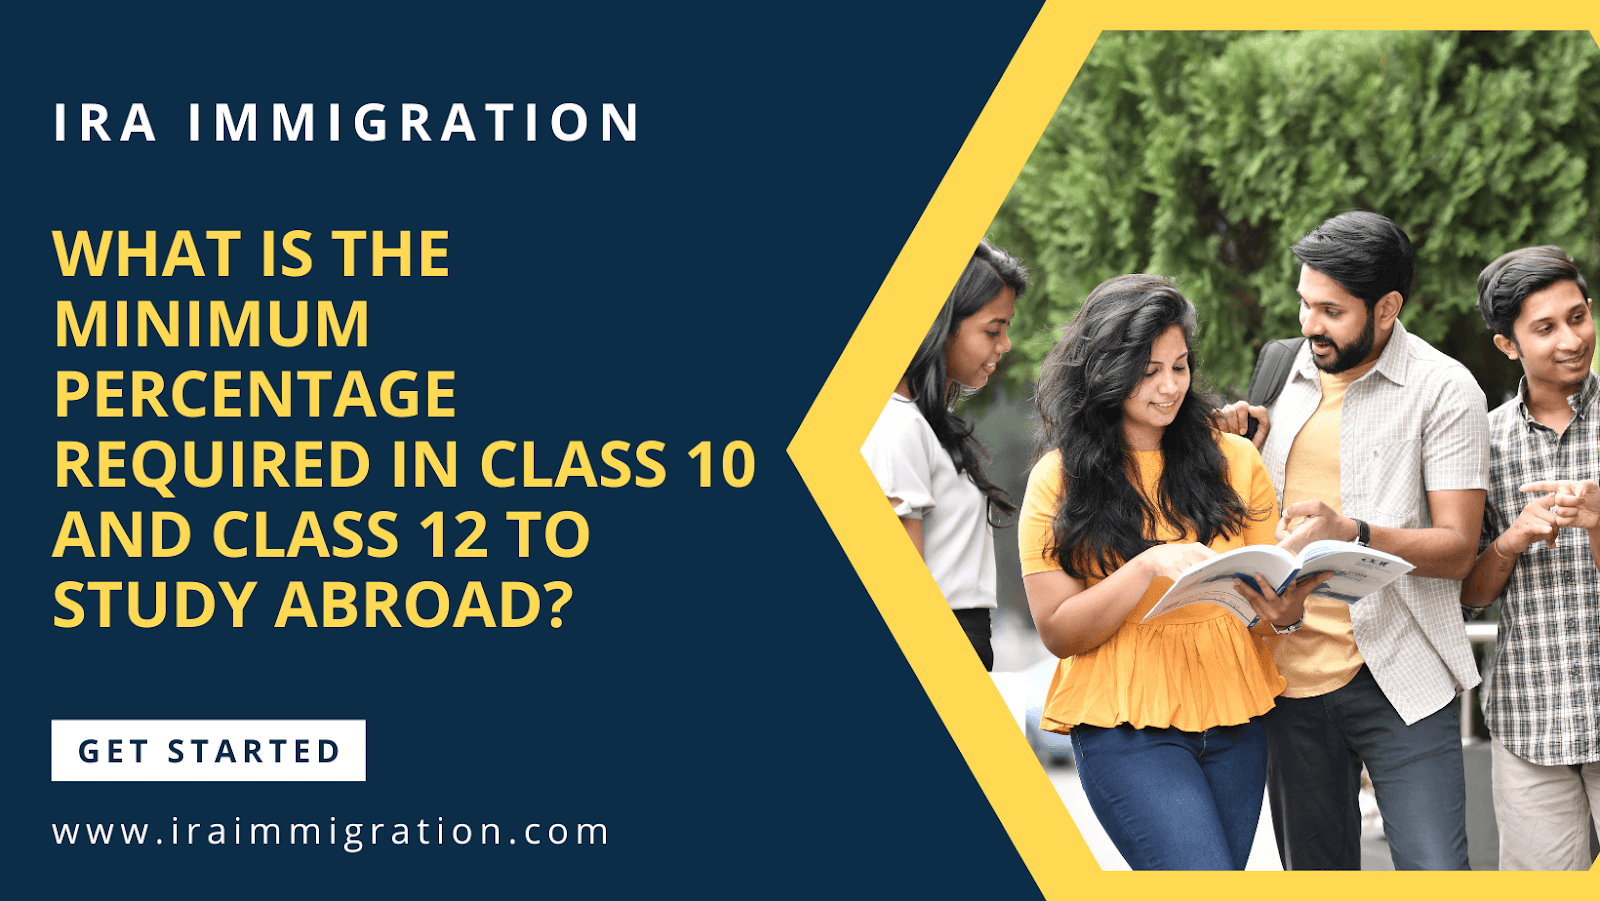 Percentage required in class 10 and class 12 to study abroad